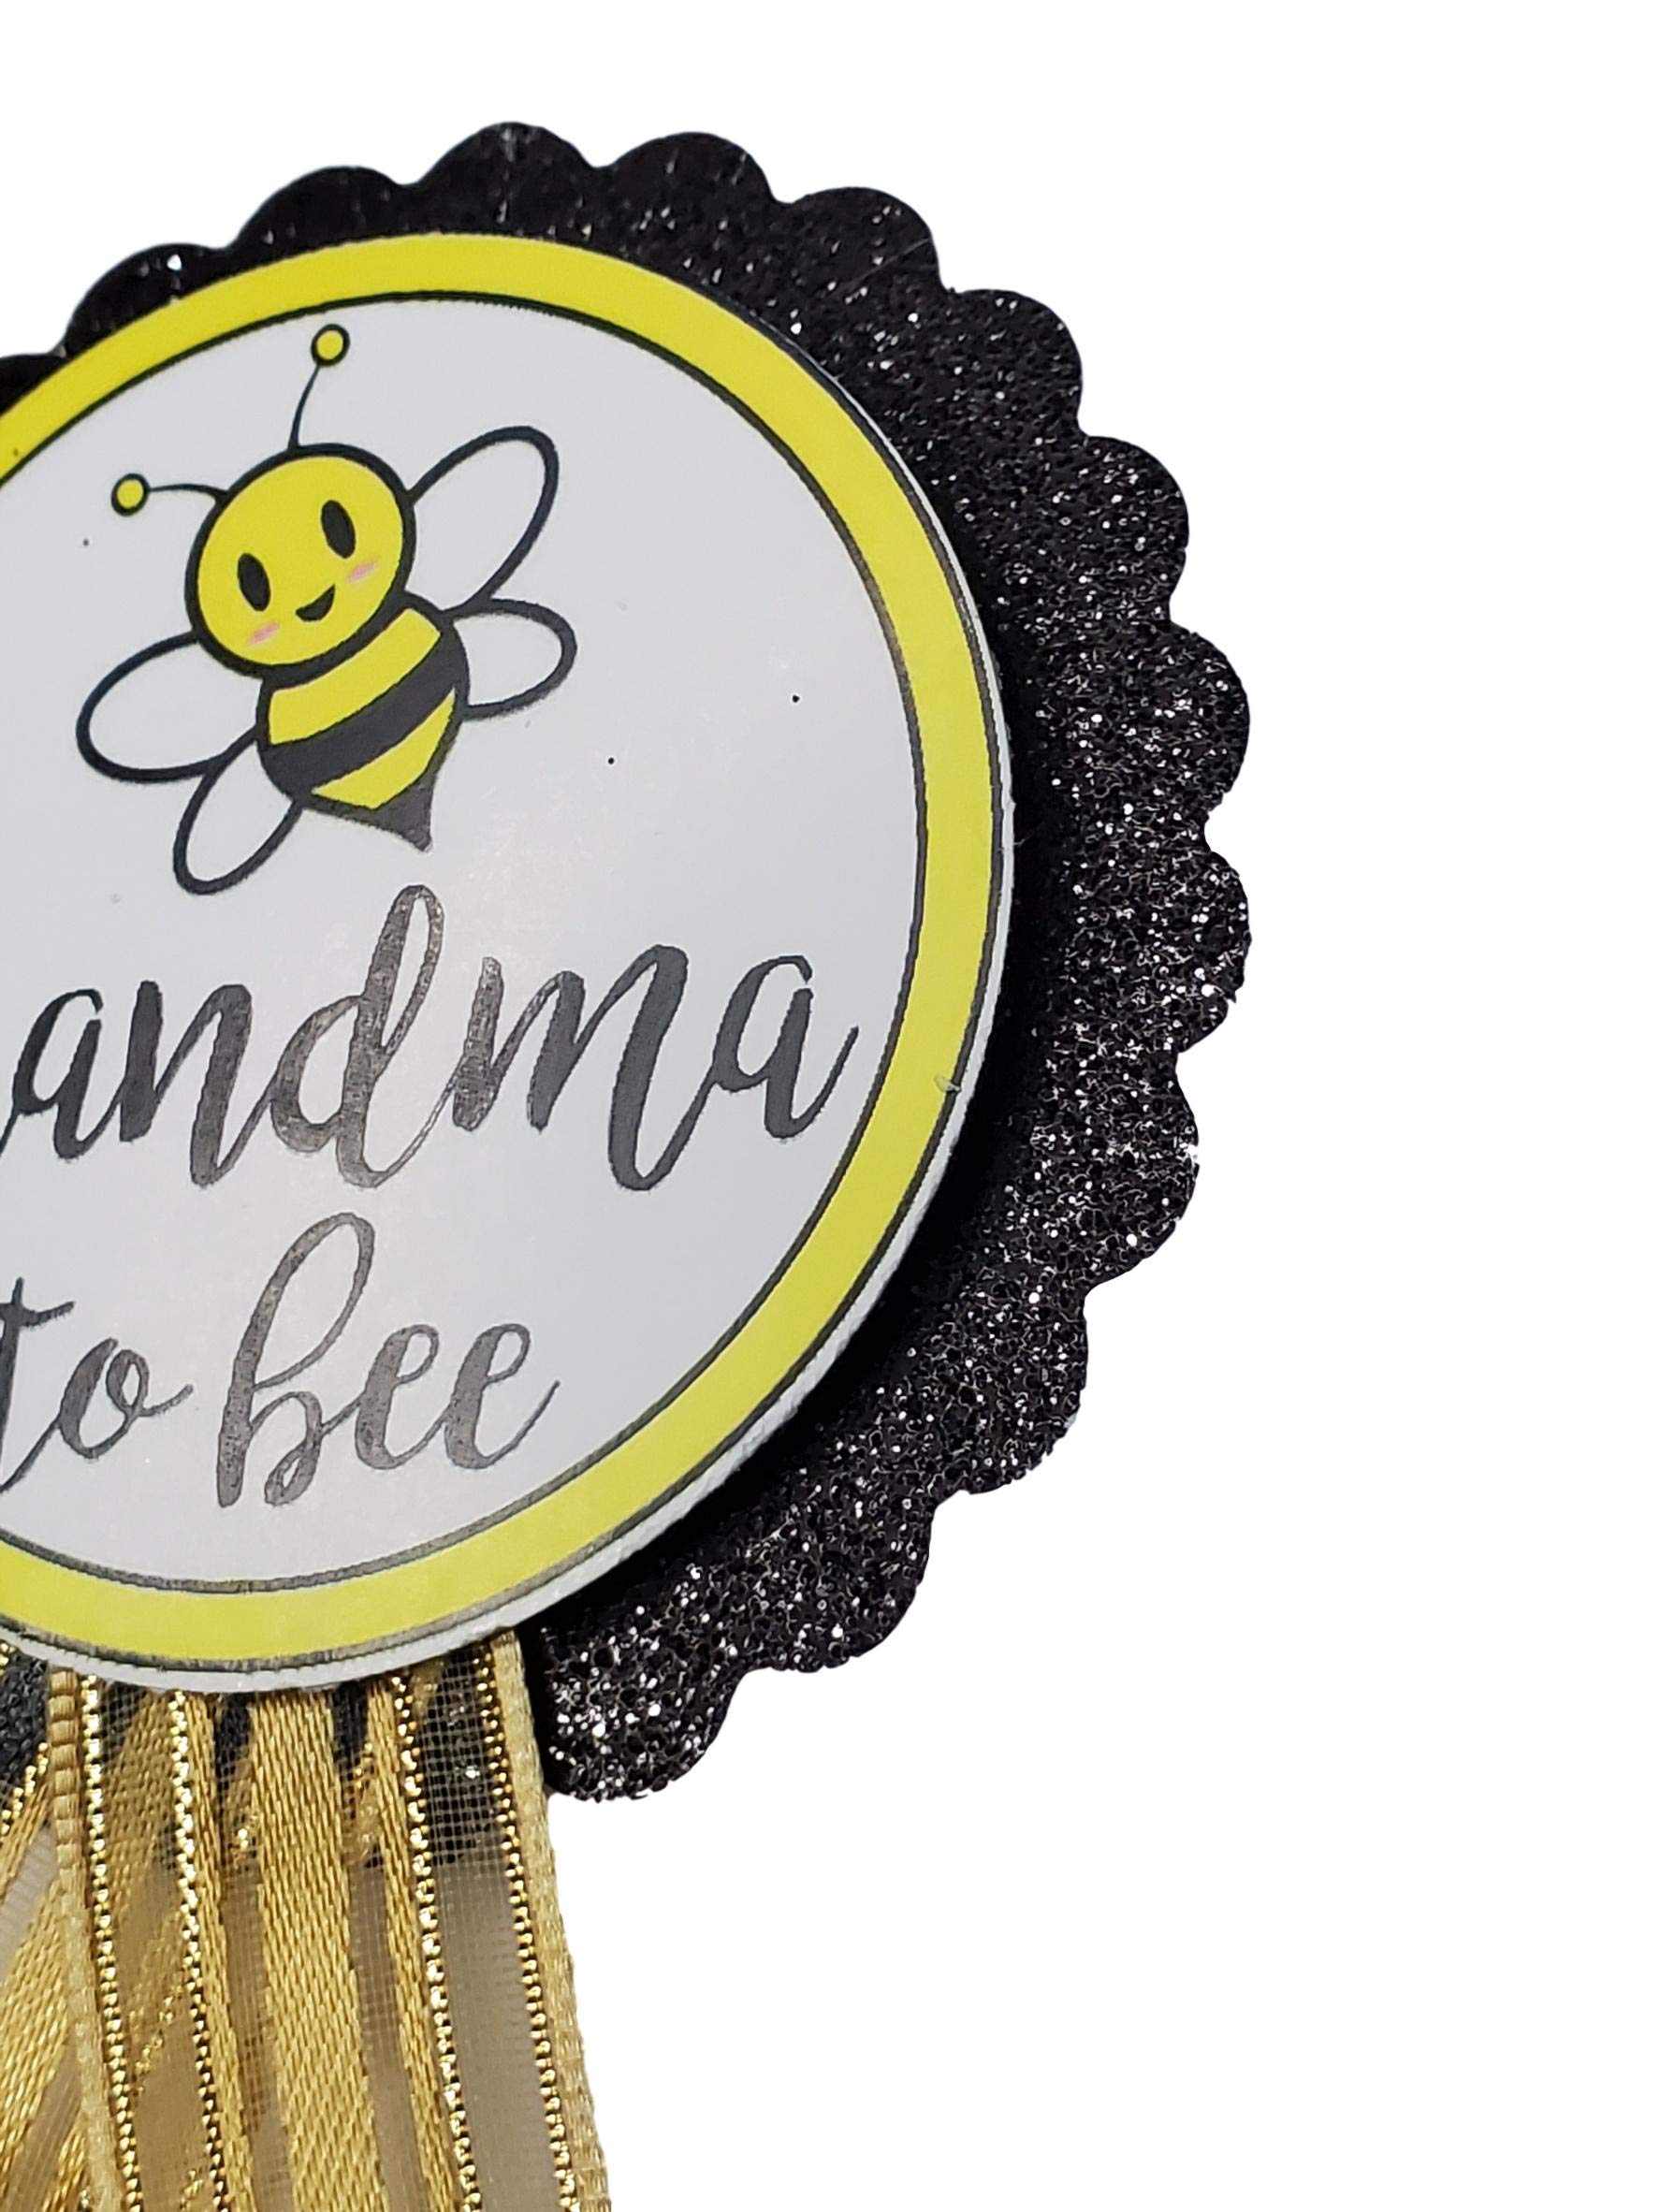 Grandma to Be Pin Baby Shower Bee Badge for Nona to wear Sprinkle Gender Reveal by Amy's Bubbling Boutique